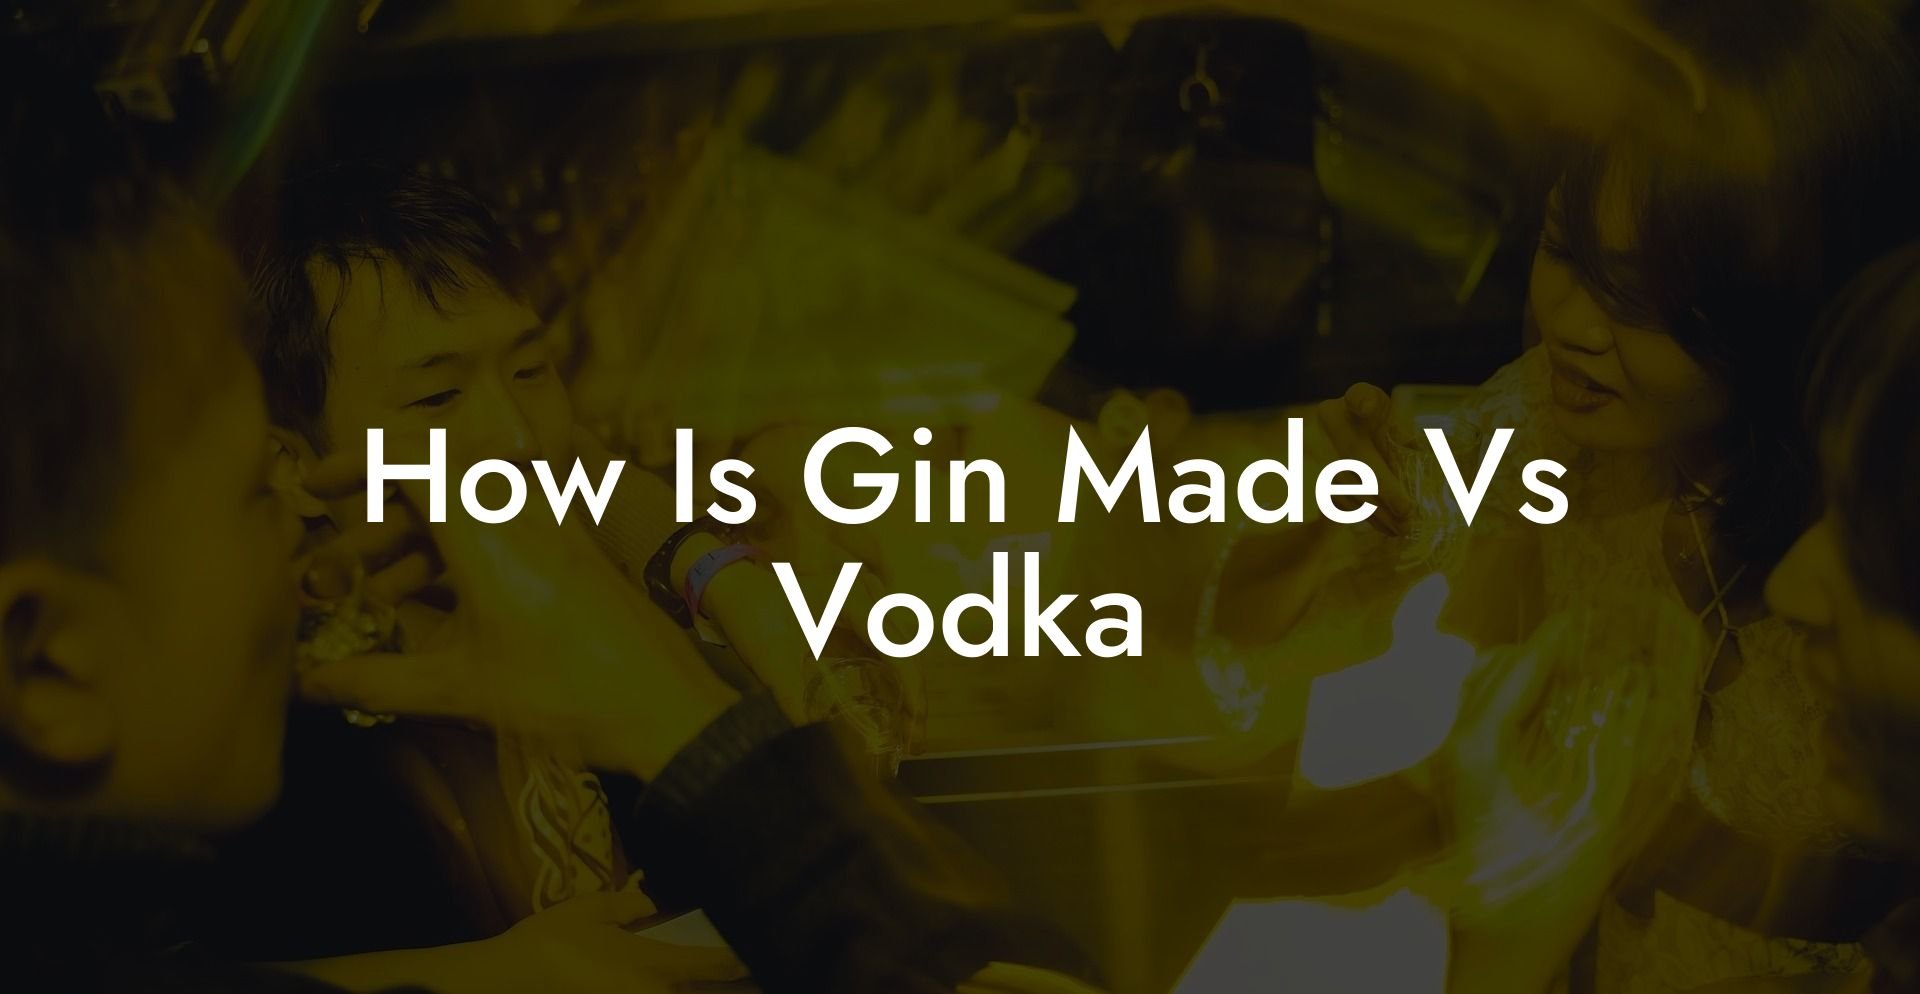 How Is Gin Made Vs Vodka